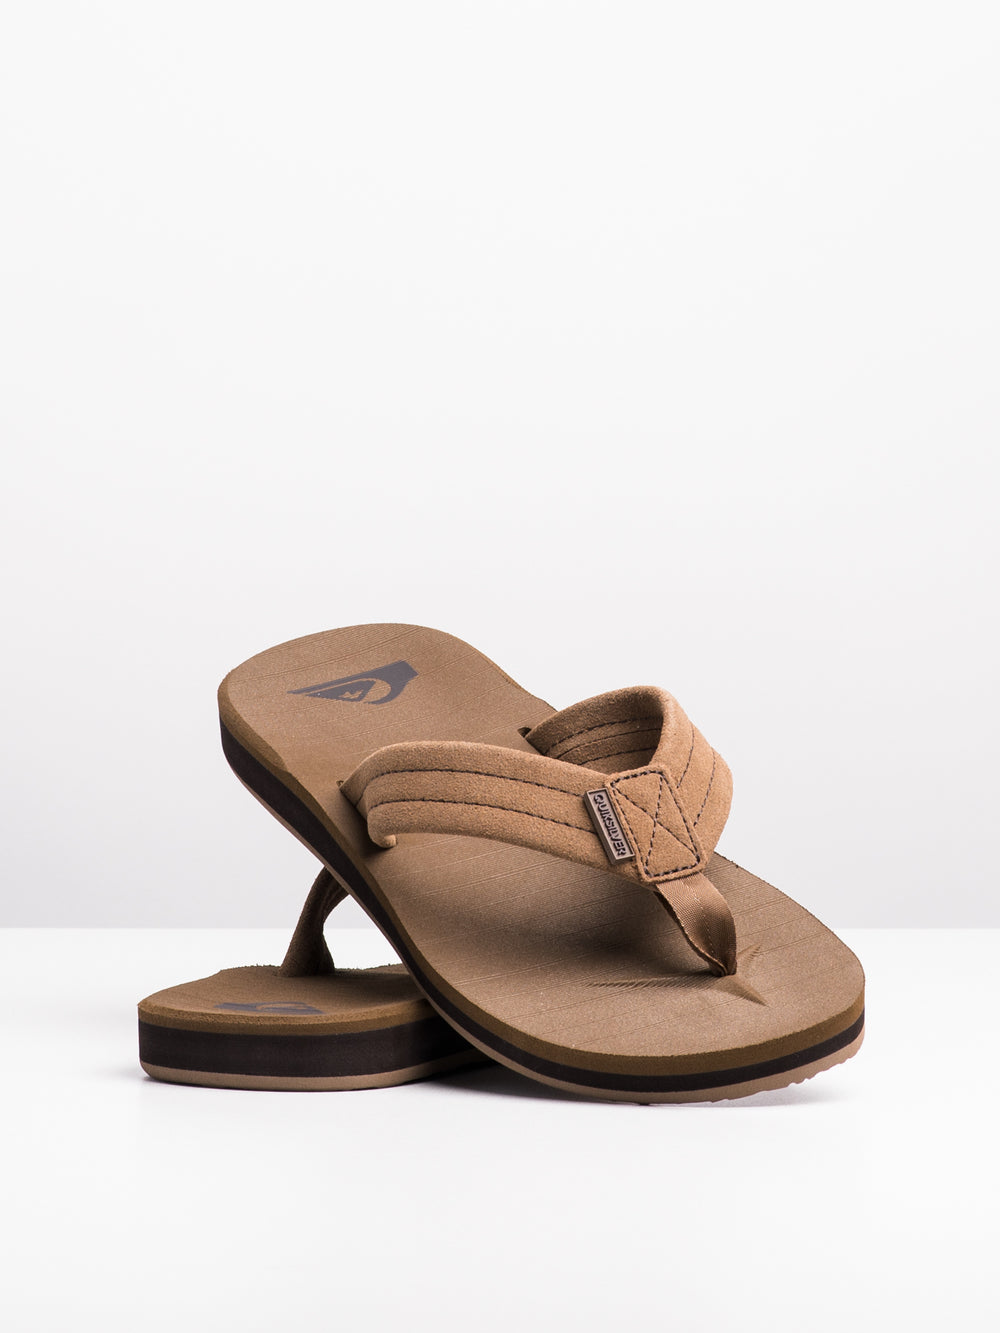 MENS QUIKSILVER CARVER SUEDE TAN SOLID SANDALS - CLEARANCE